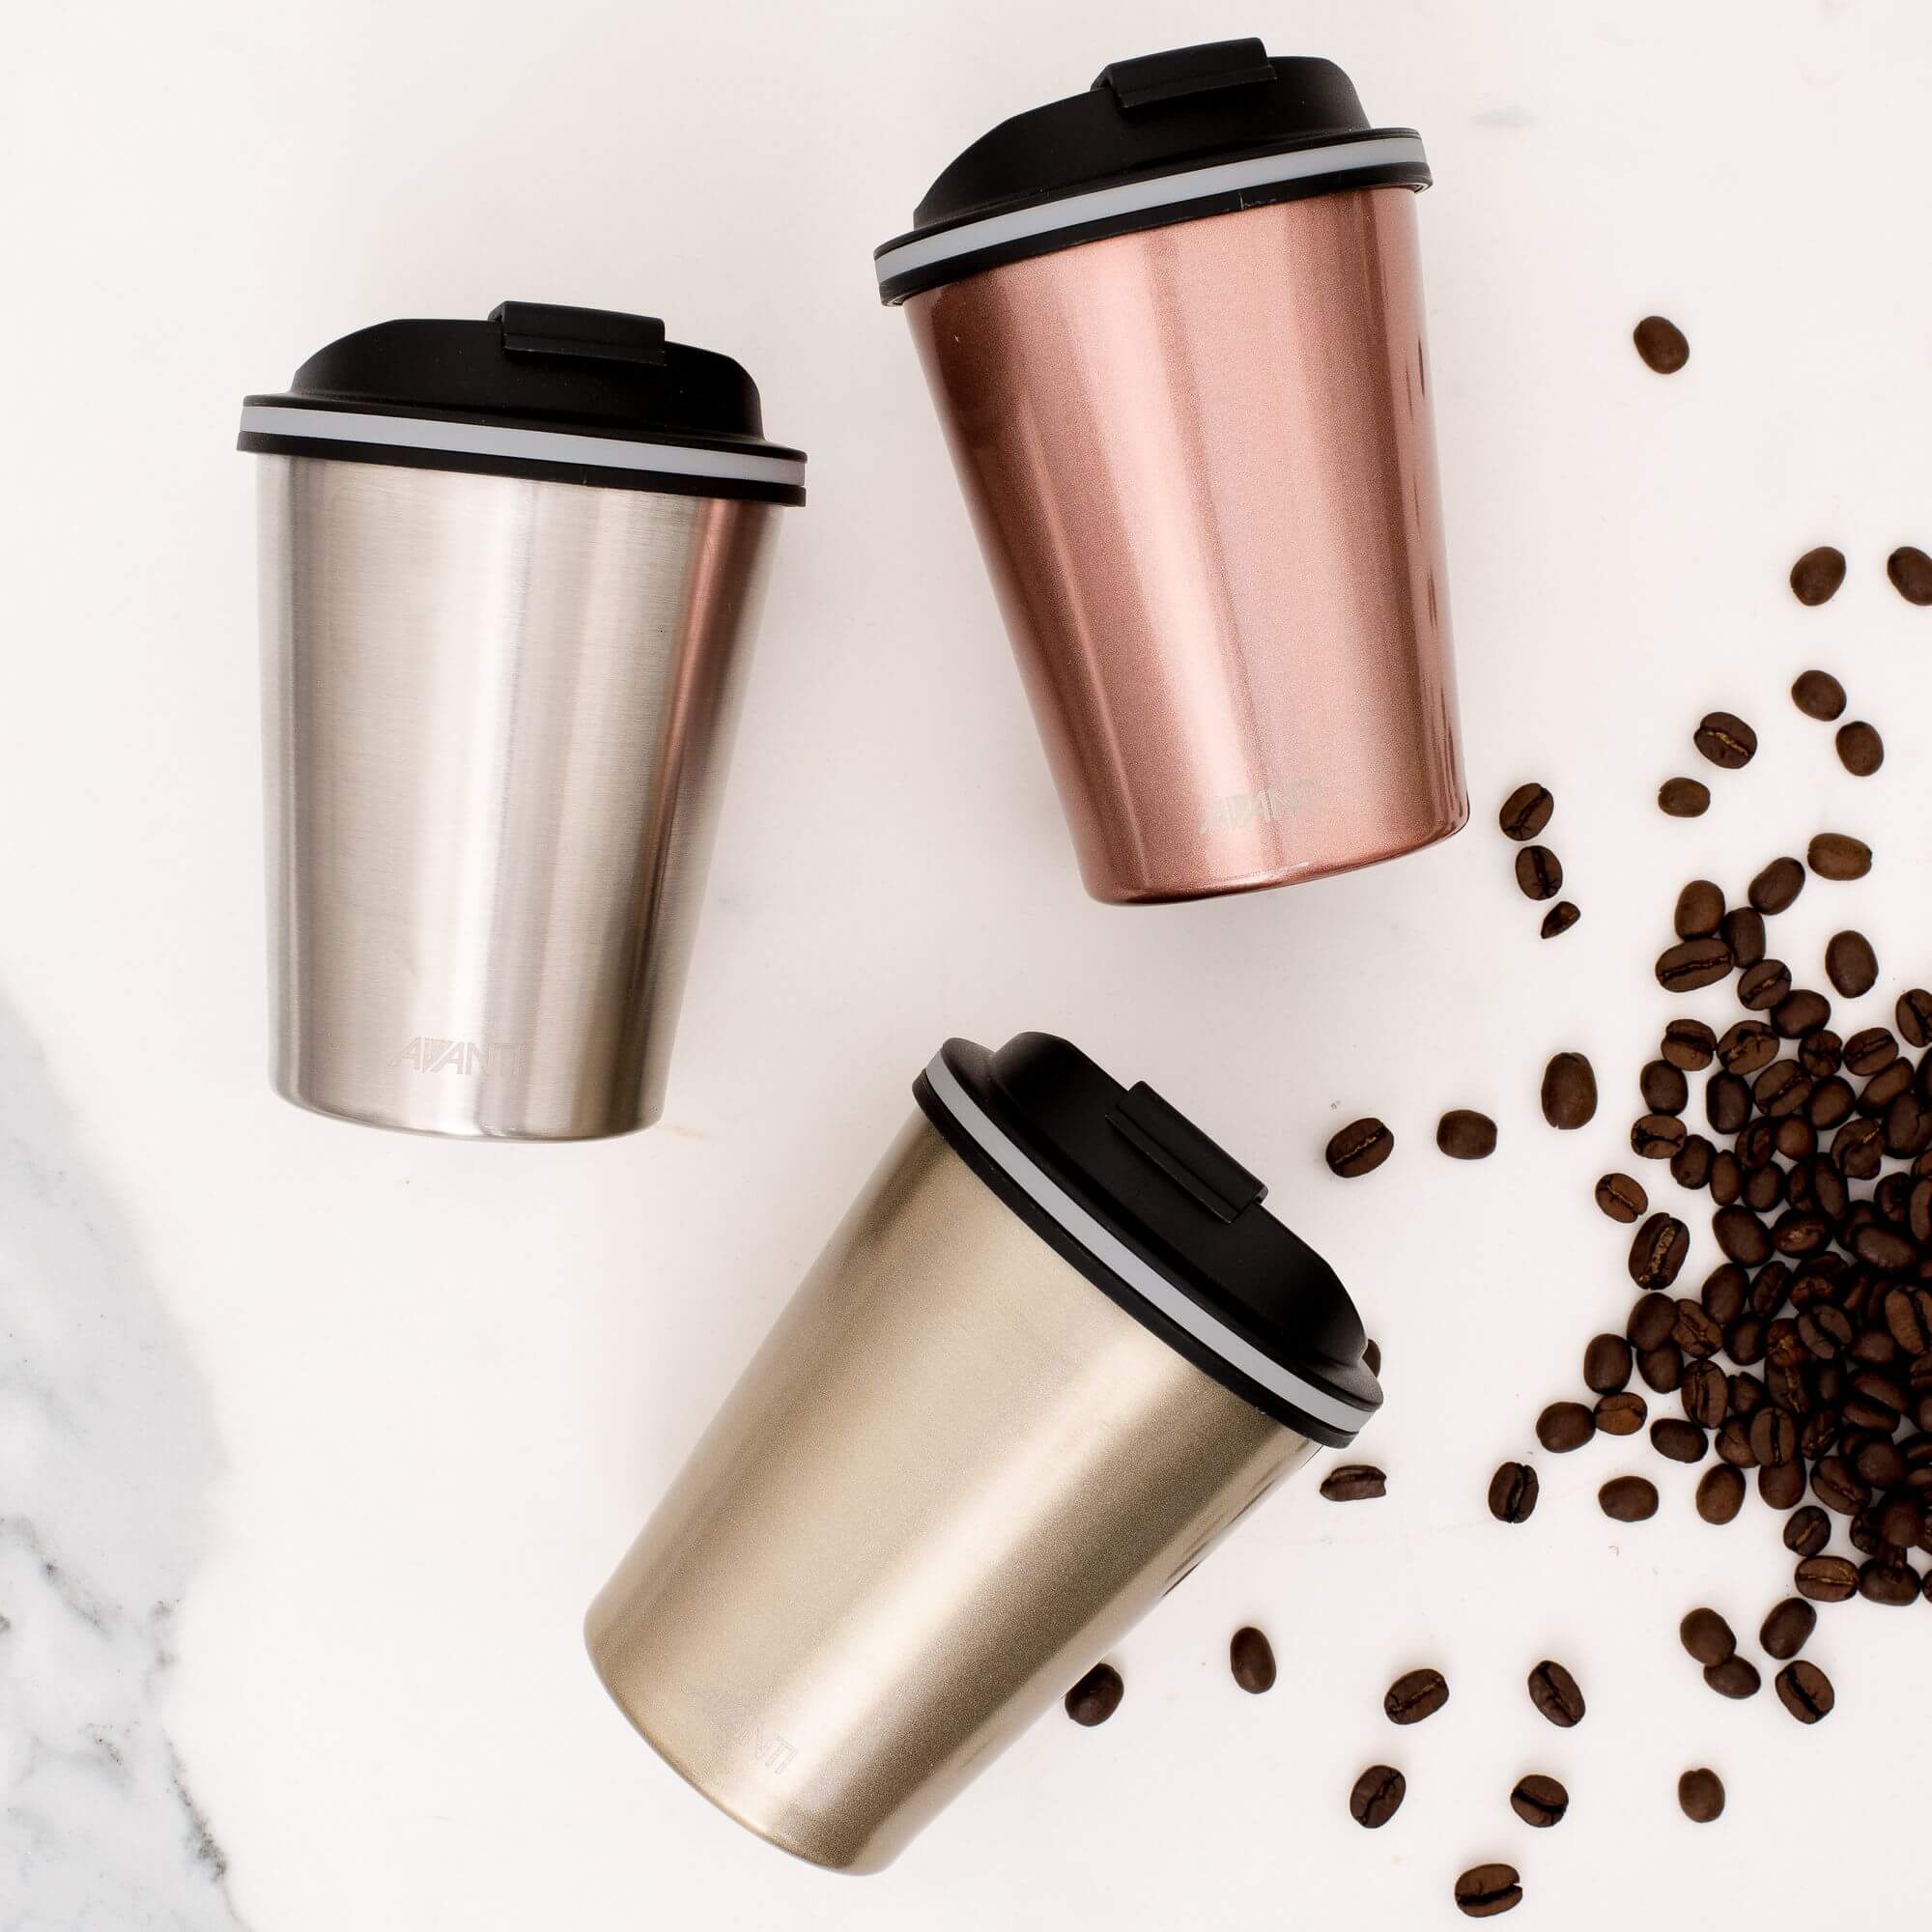 Insulated stainless steel coffee cups next to coffee beans